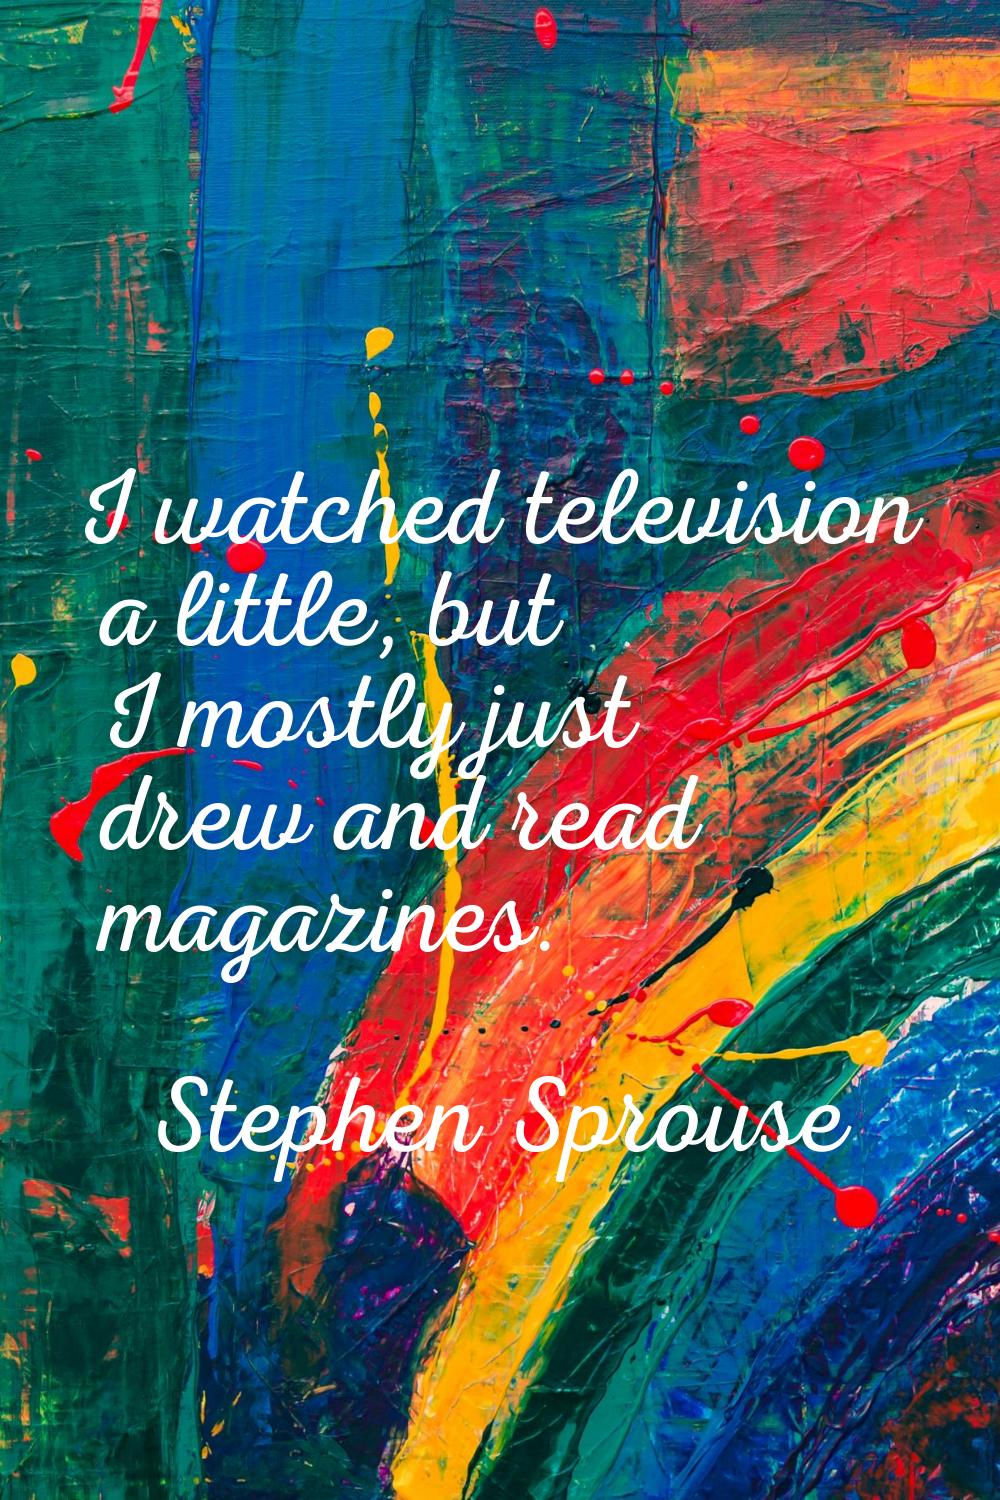 I watched television a little, but I mostly just drew and read magazines.